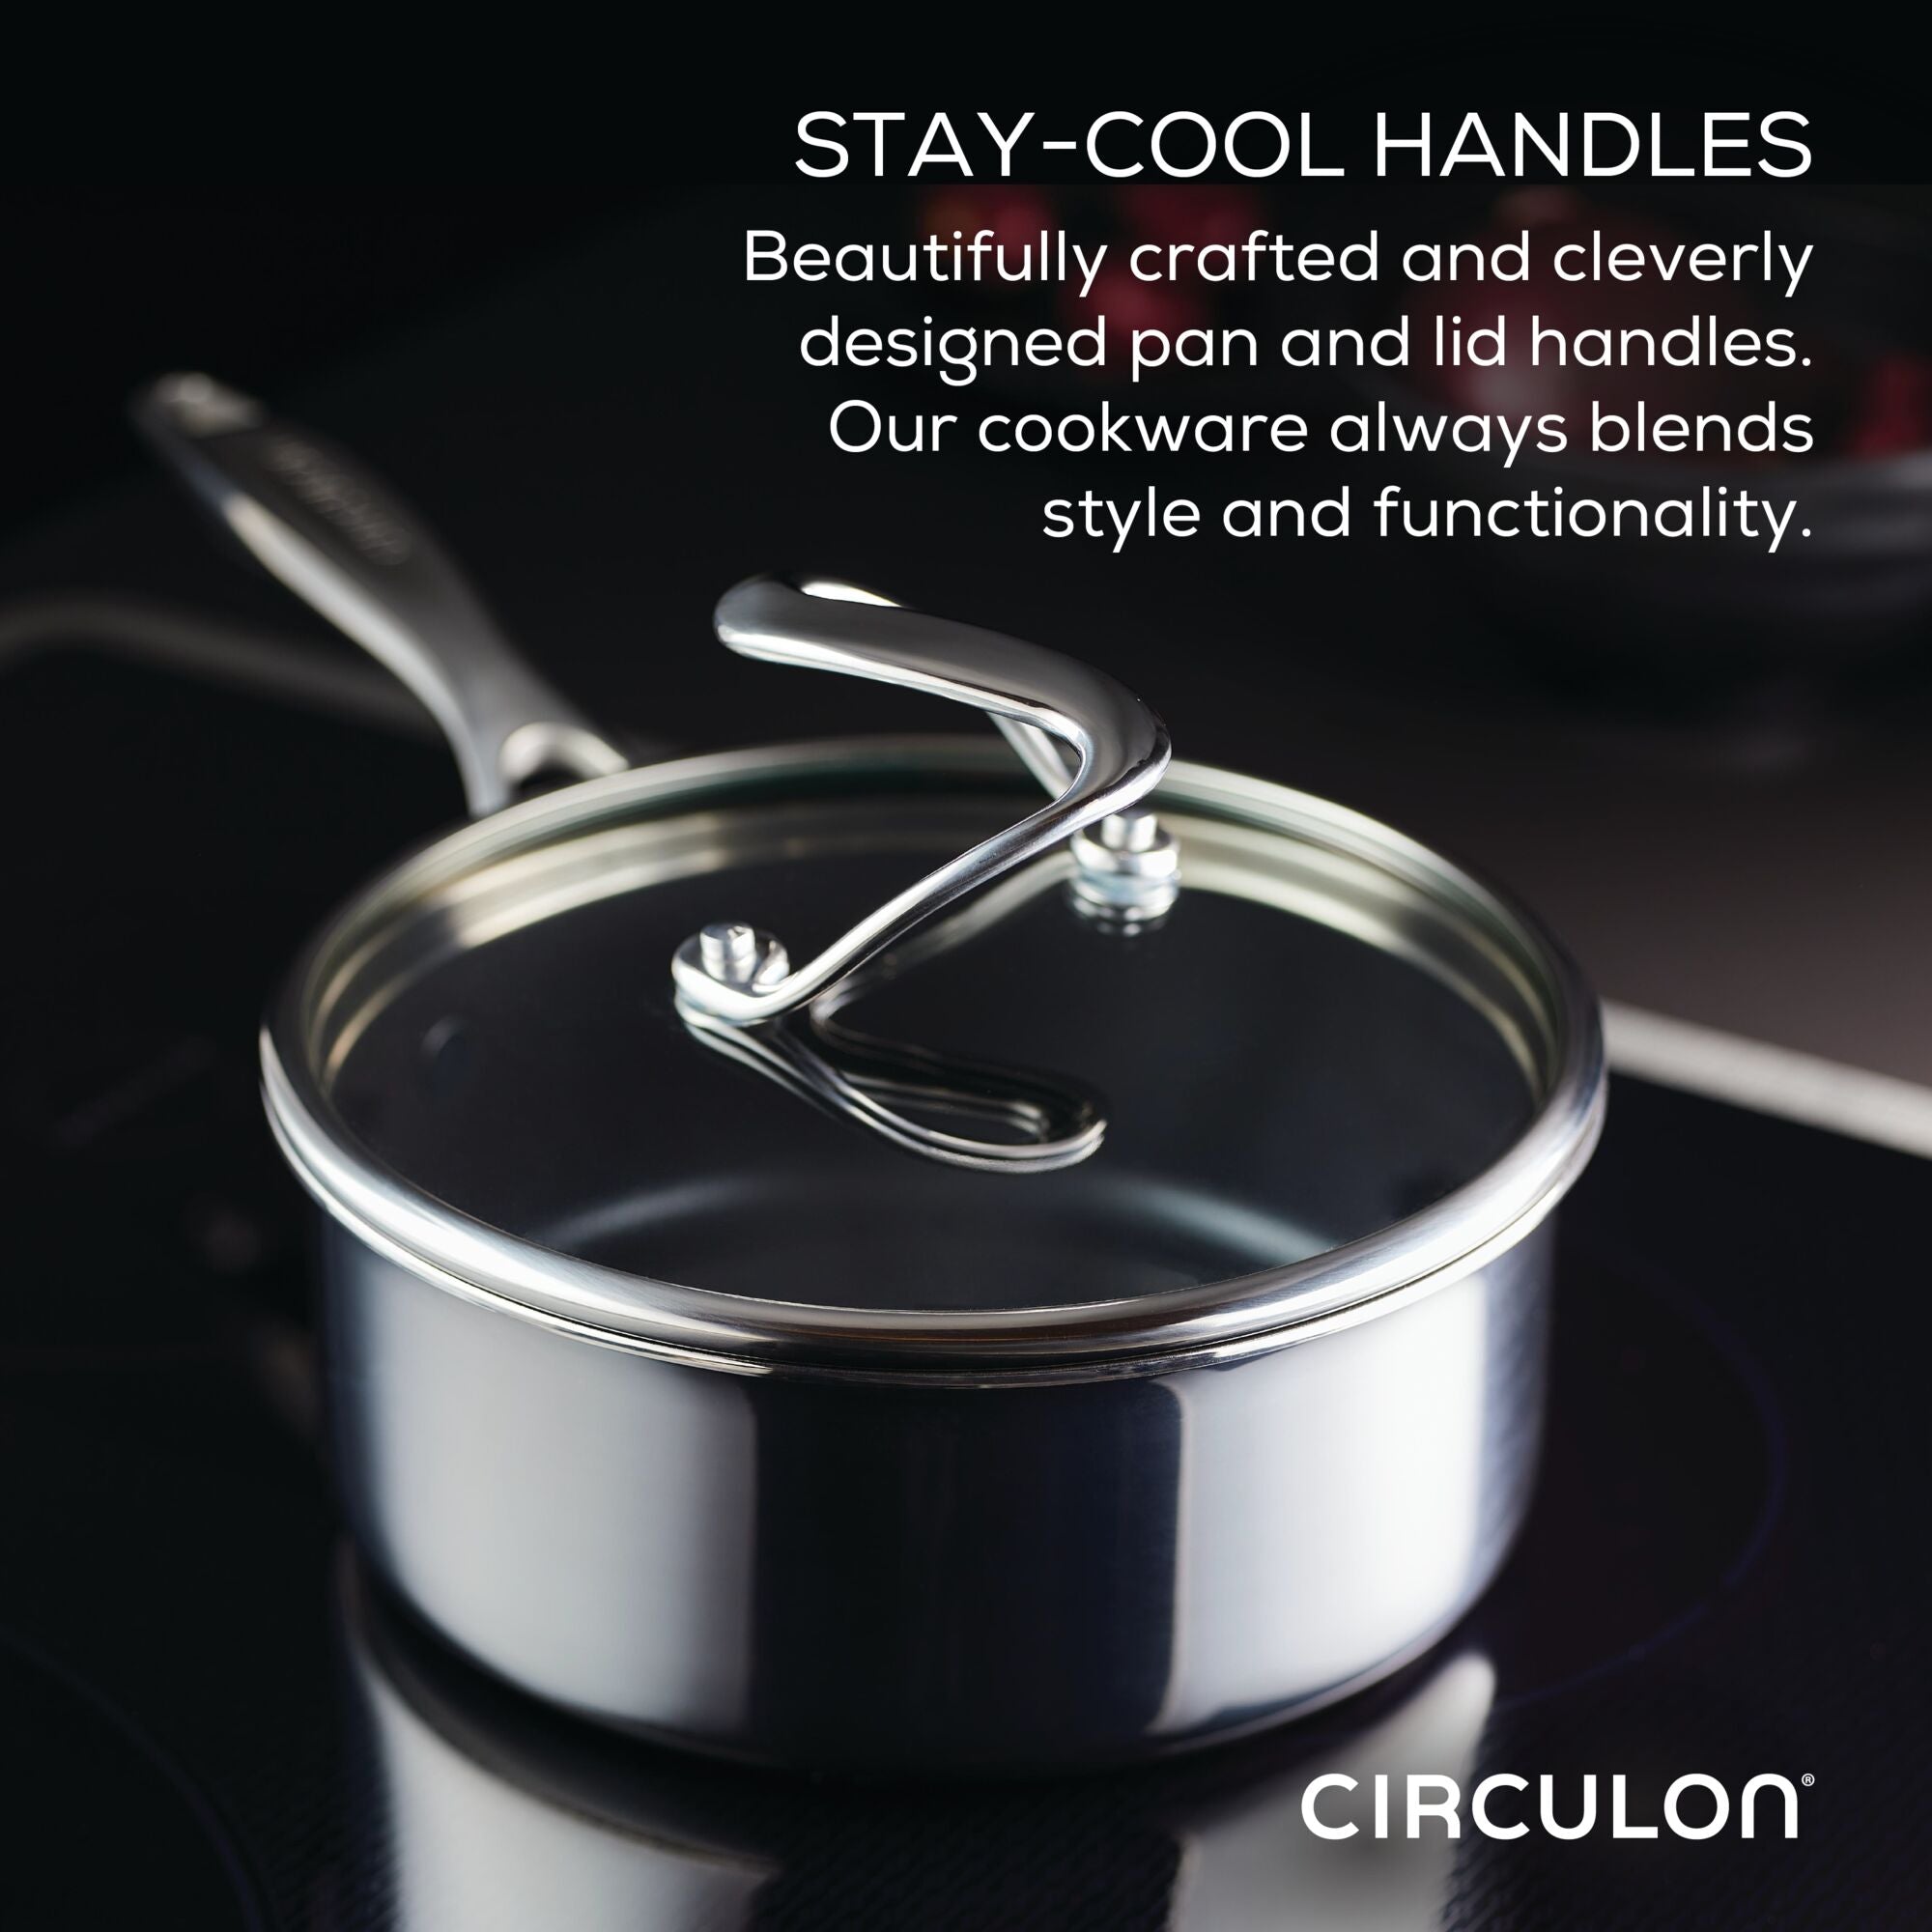 Circulon Clad Stainless Steel Frying Pans/Skillet Set with Hybrid